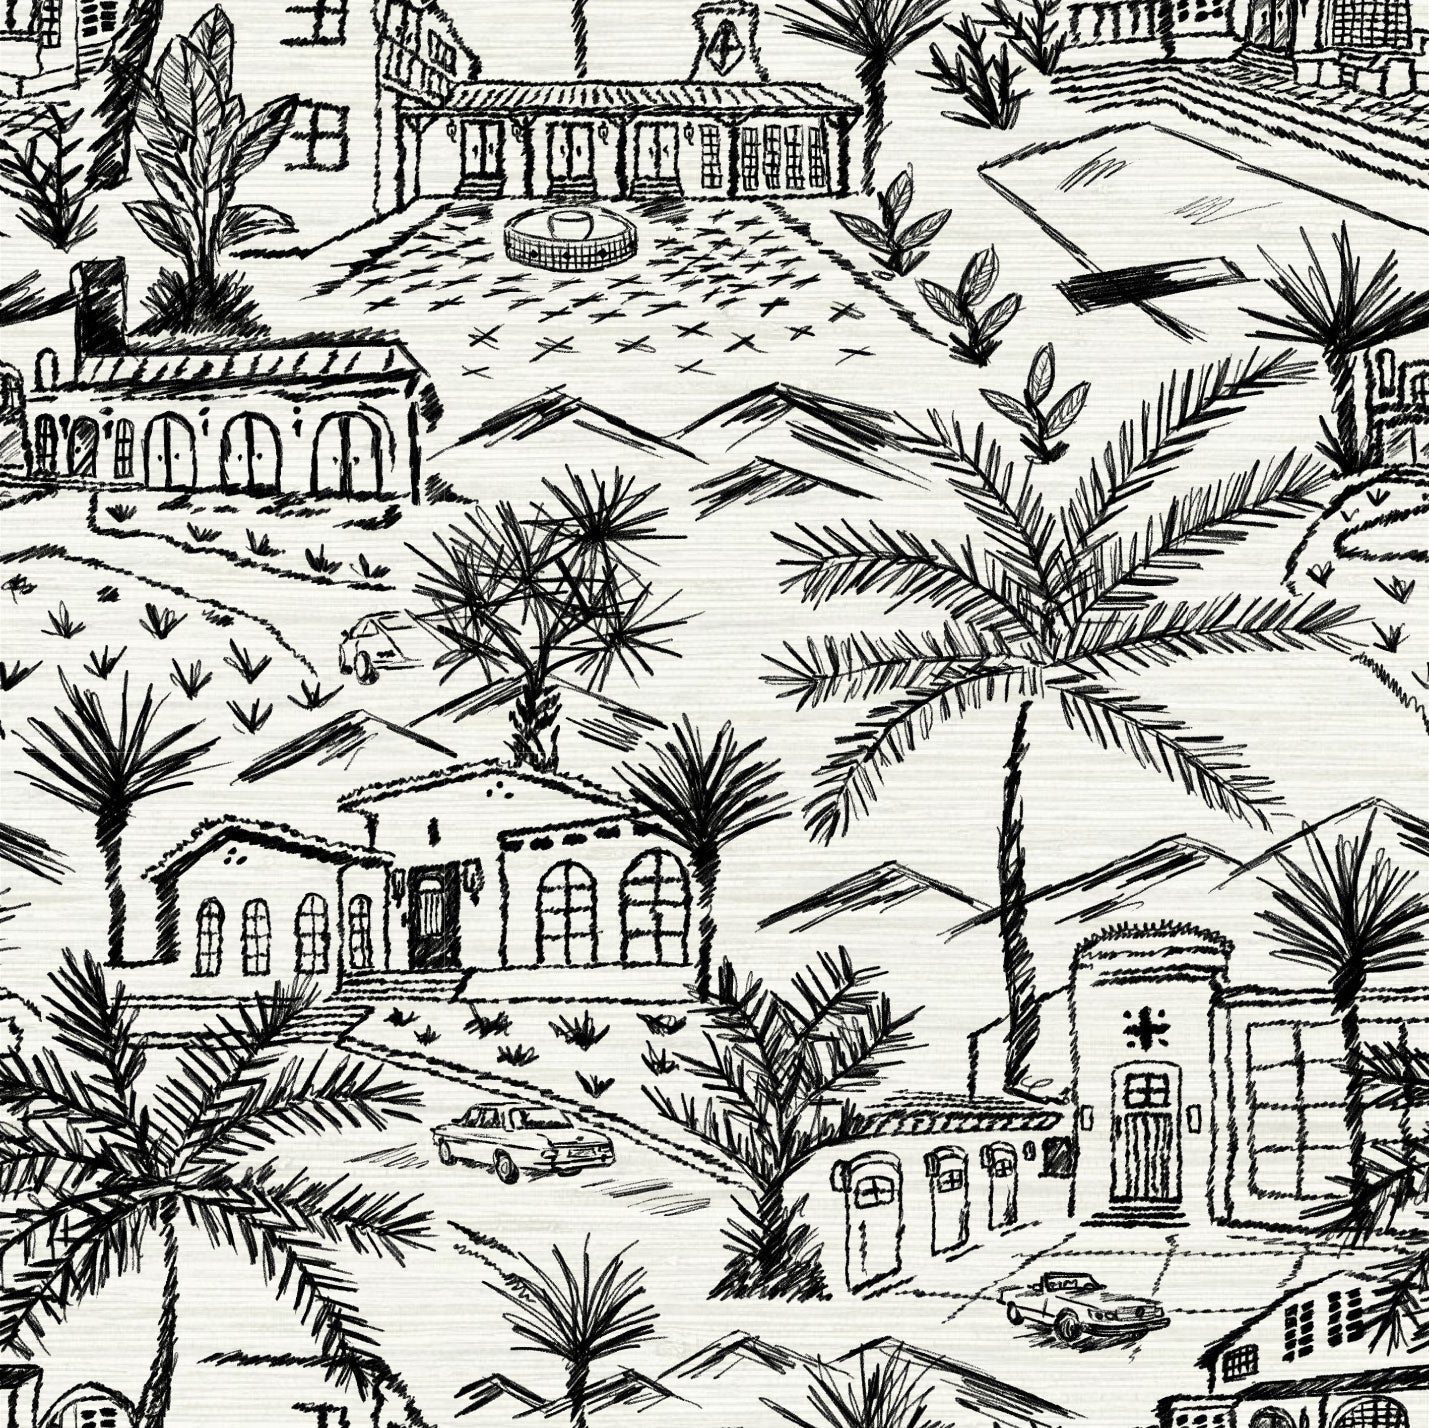 Grasscloth printed modern toile design featuring white base and black graphic for a one color print with Spanish style houses, variety of palm trees and tropical and desert inspired plants, massive pools, vintage cars and fountains with mountains in the background.